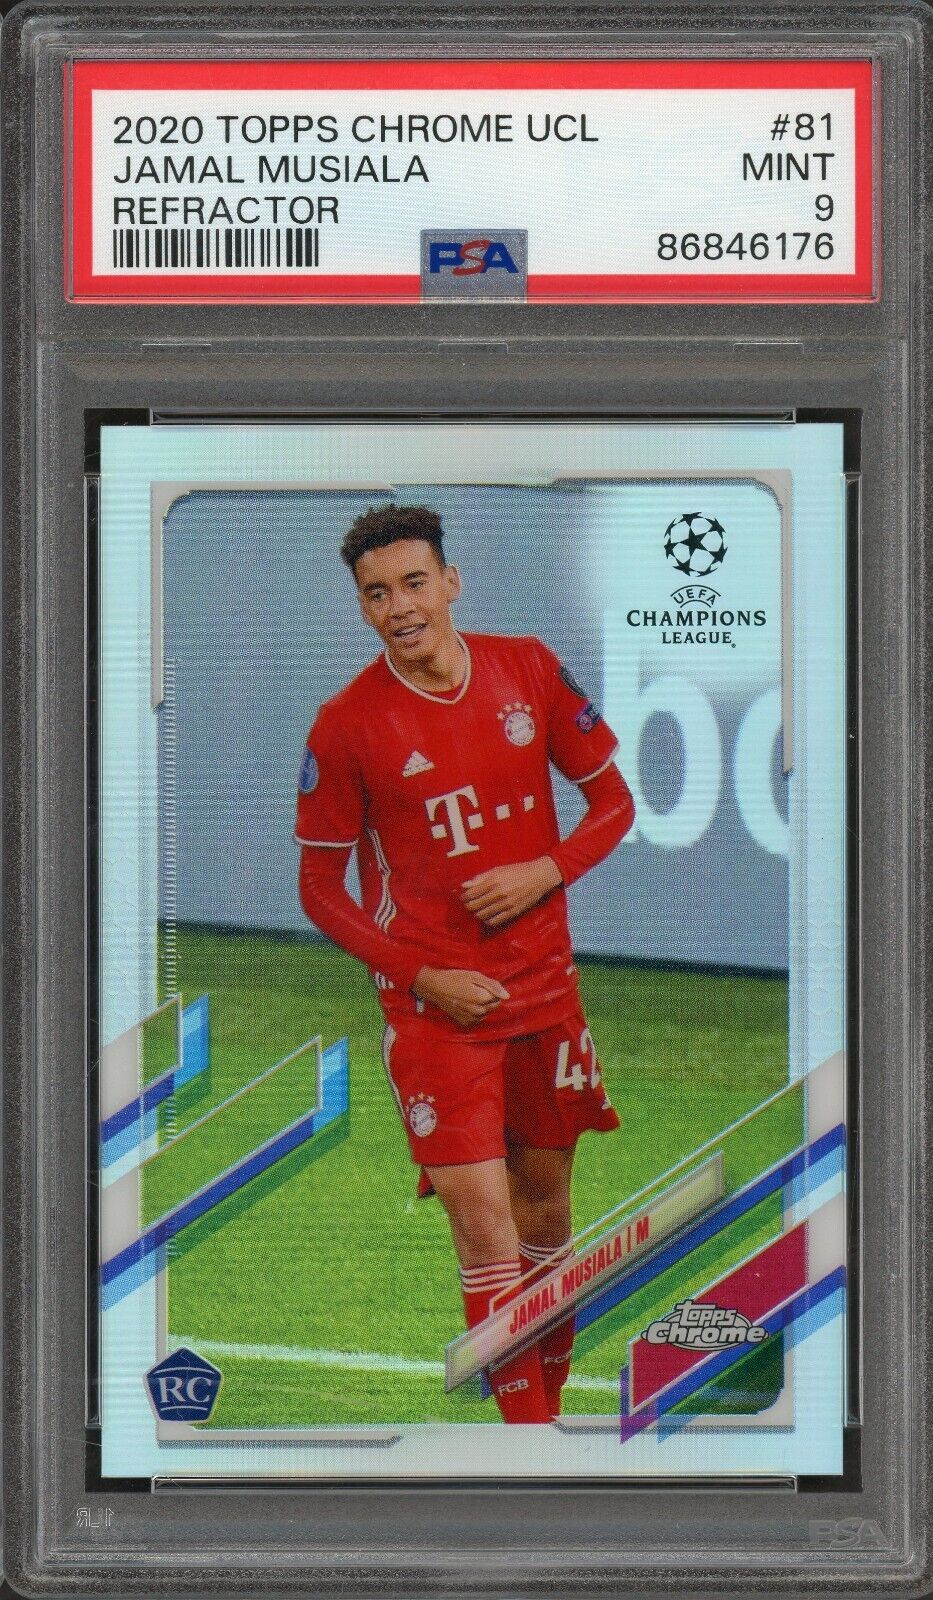 2020 Topps Chrome UCL Jamal Musiala Refractor PSA 9 Mint #81 RC Rookie